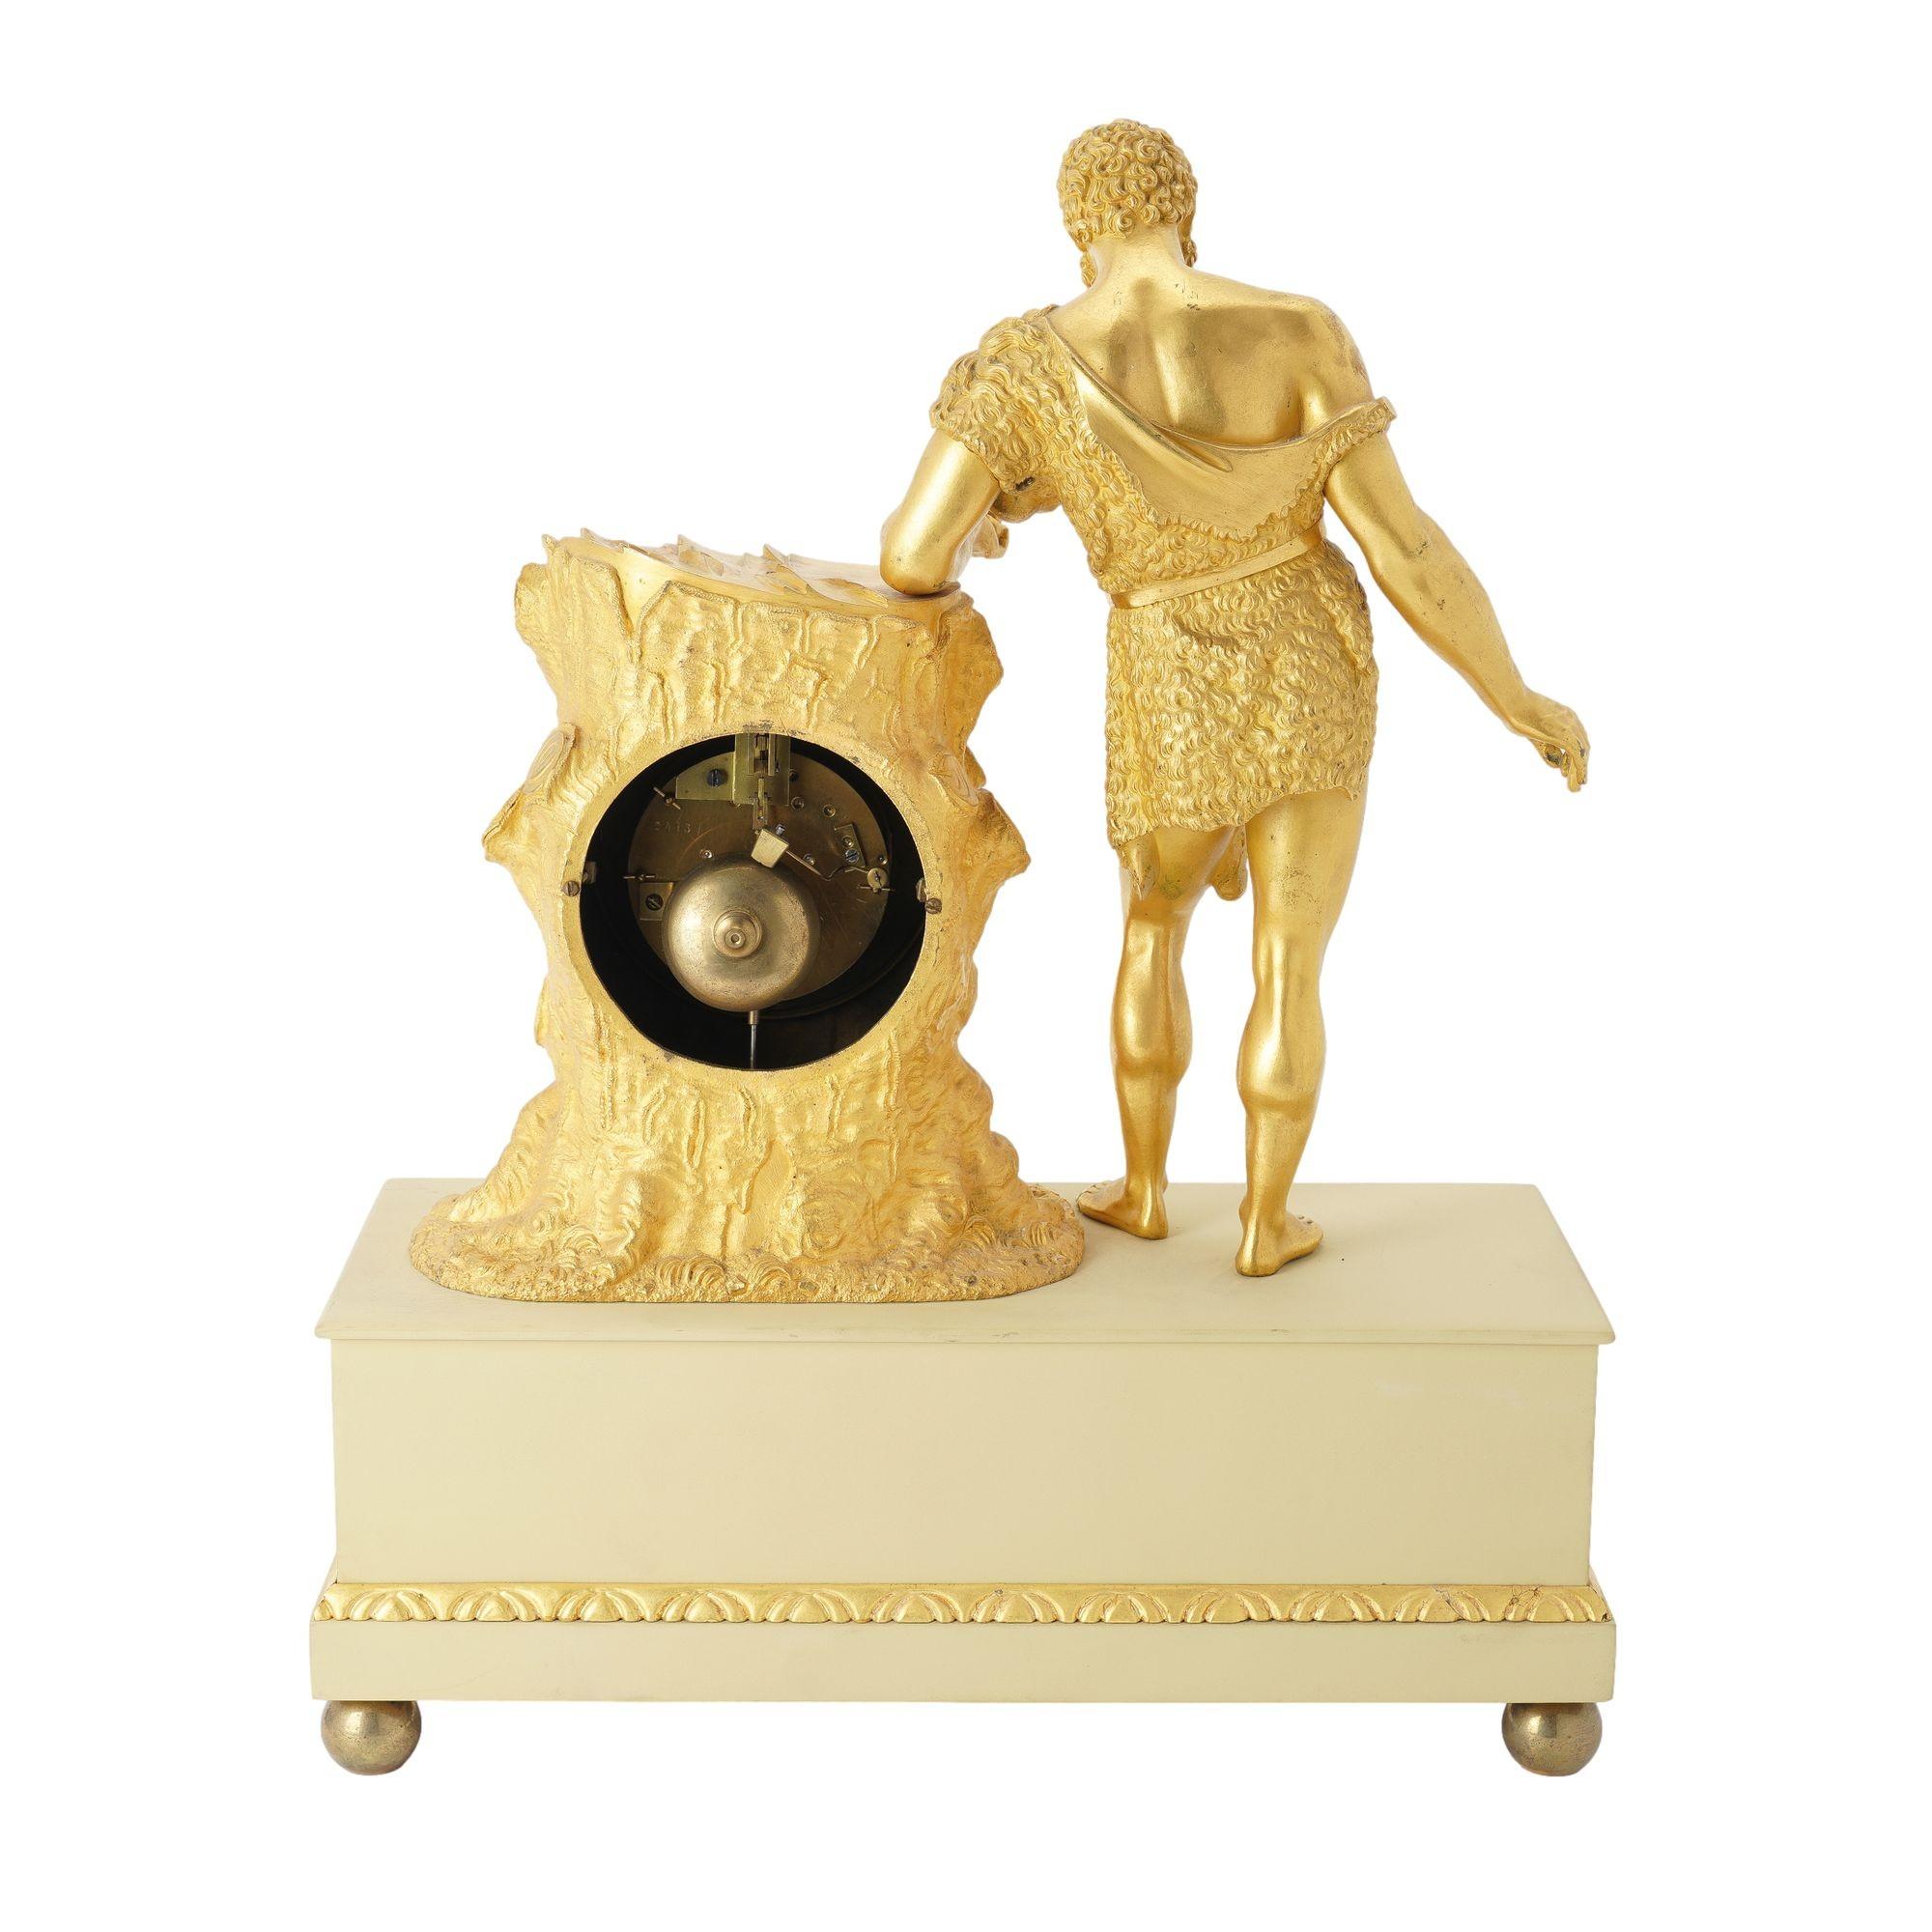 French Charles X period fire gilt bronze mantel clock, c. 1820-30 For Sale 3